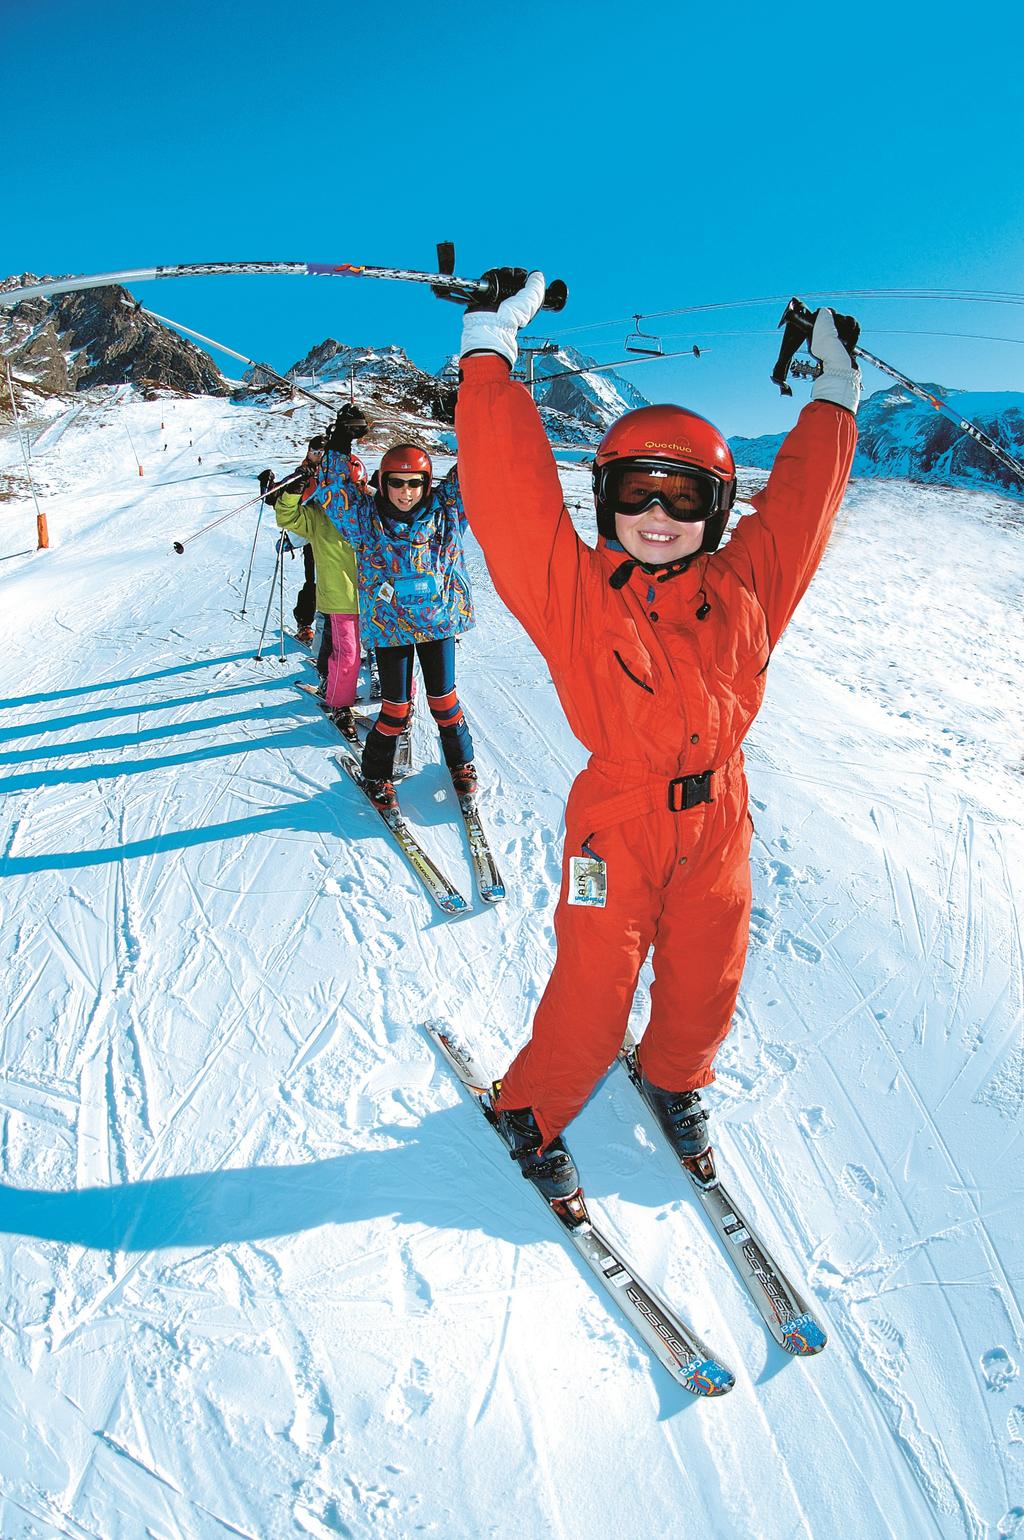 ACTION OUTDOORS SCHOOL SKI TRIPS WINTER 2016/17 EVEN AS THE LEAD TEACHER OF THE SCHOOL GROUP, I